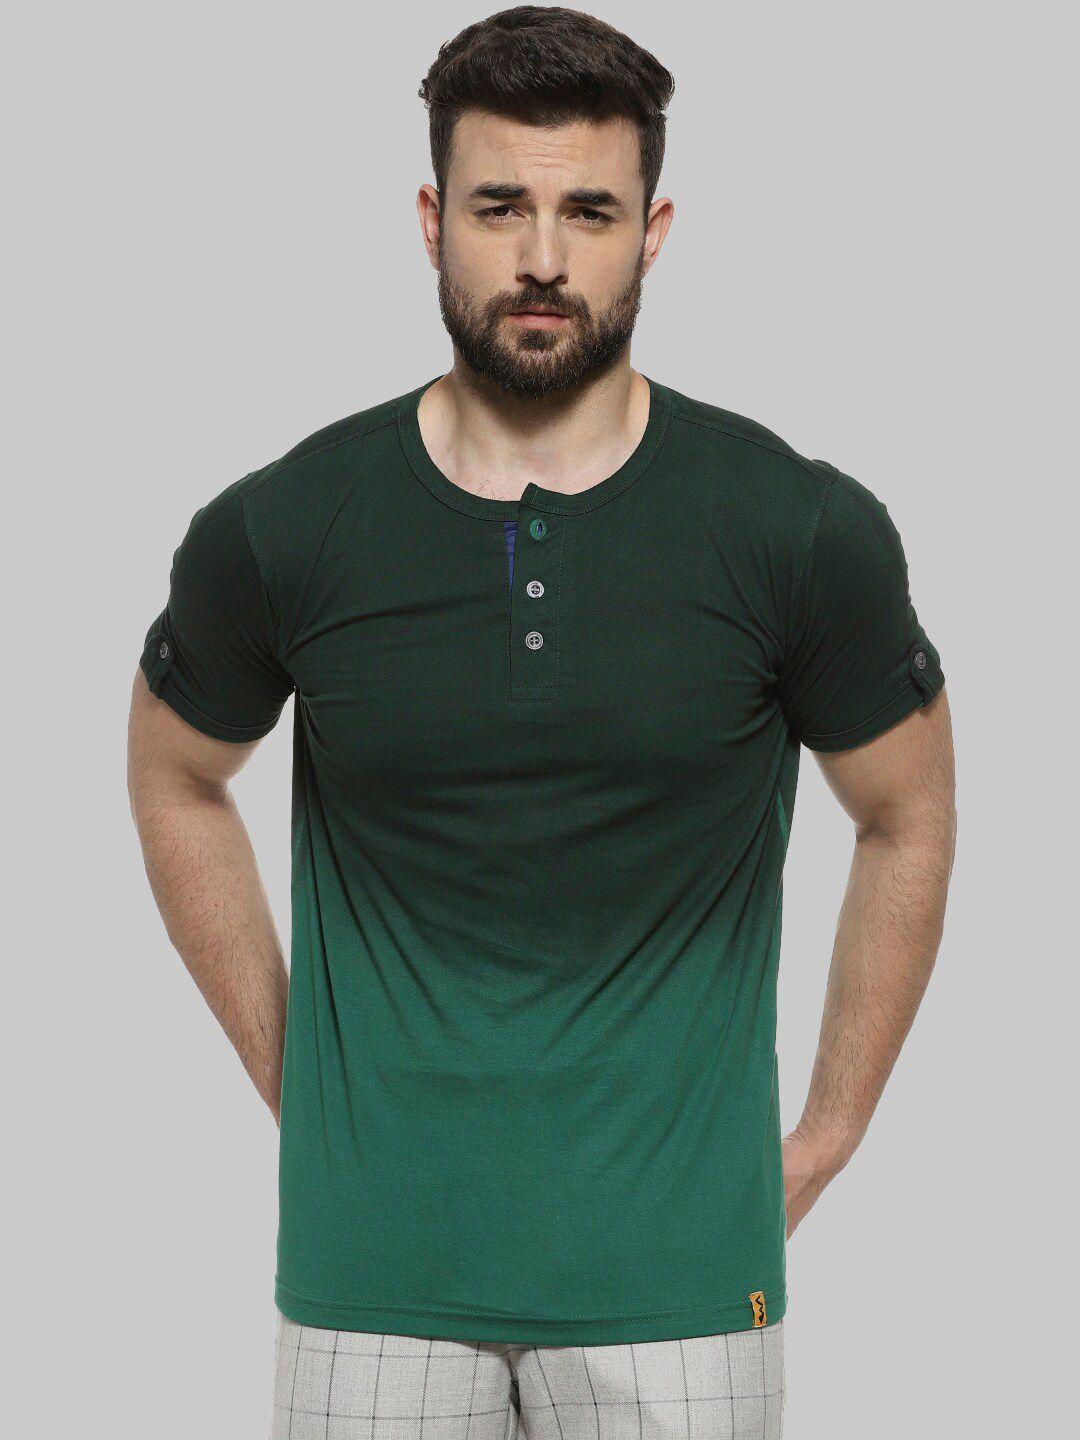 campus sutra green henley neck short sleeves casual cotton t-shirt